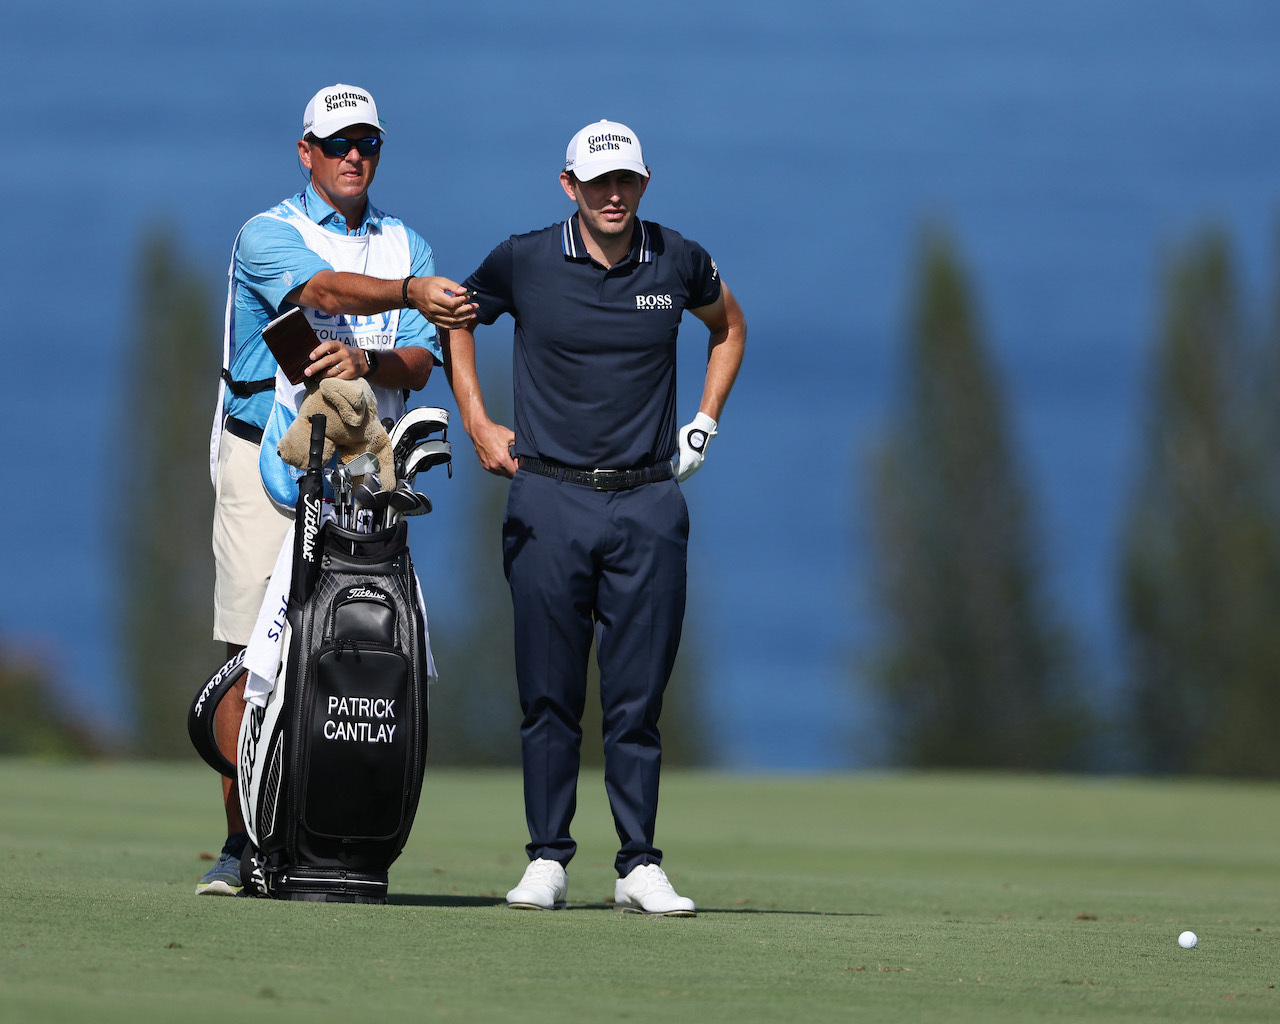 Patrick Cantlay reads putt with caddy